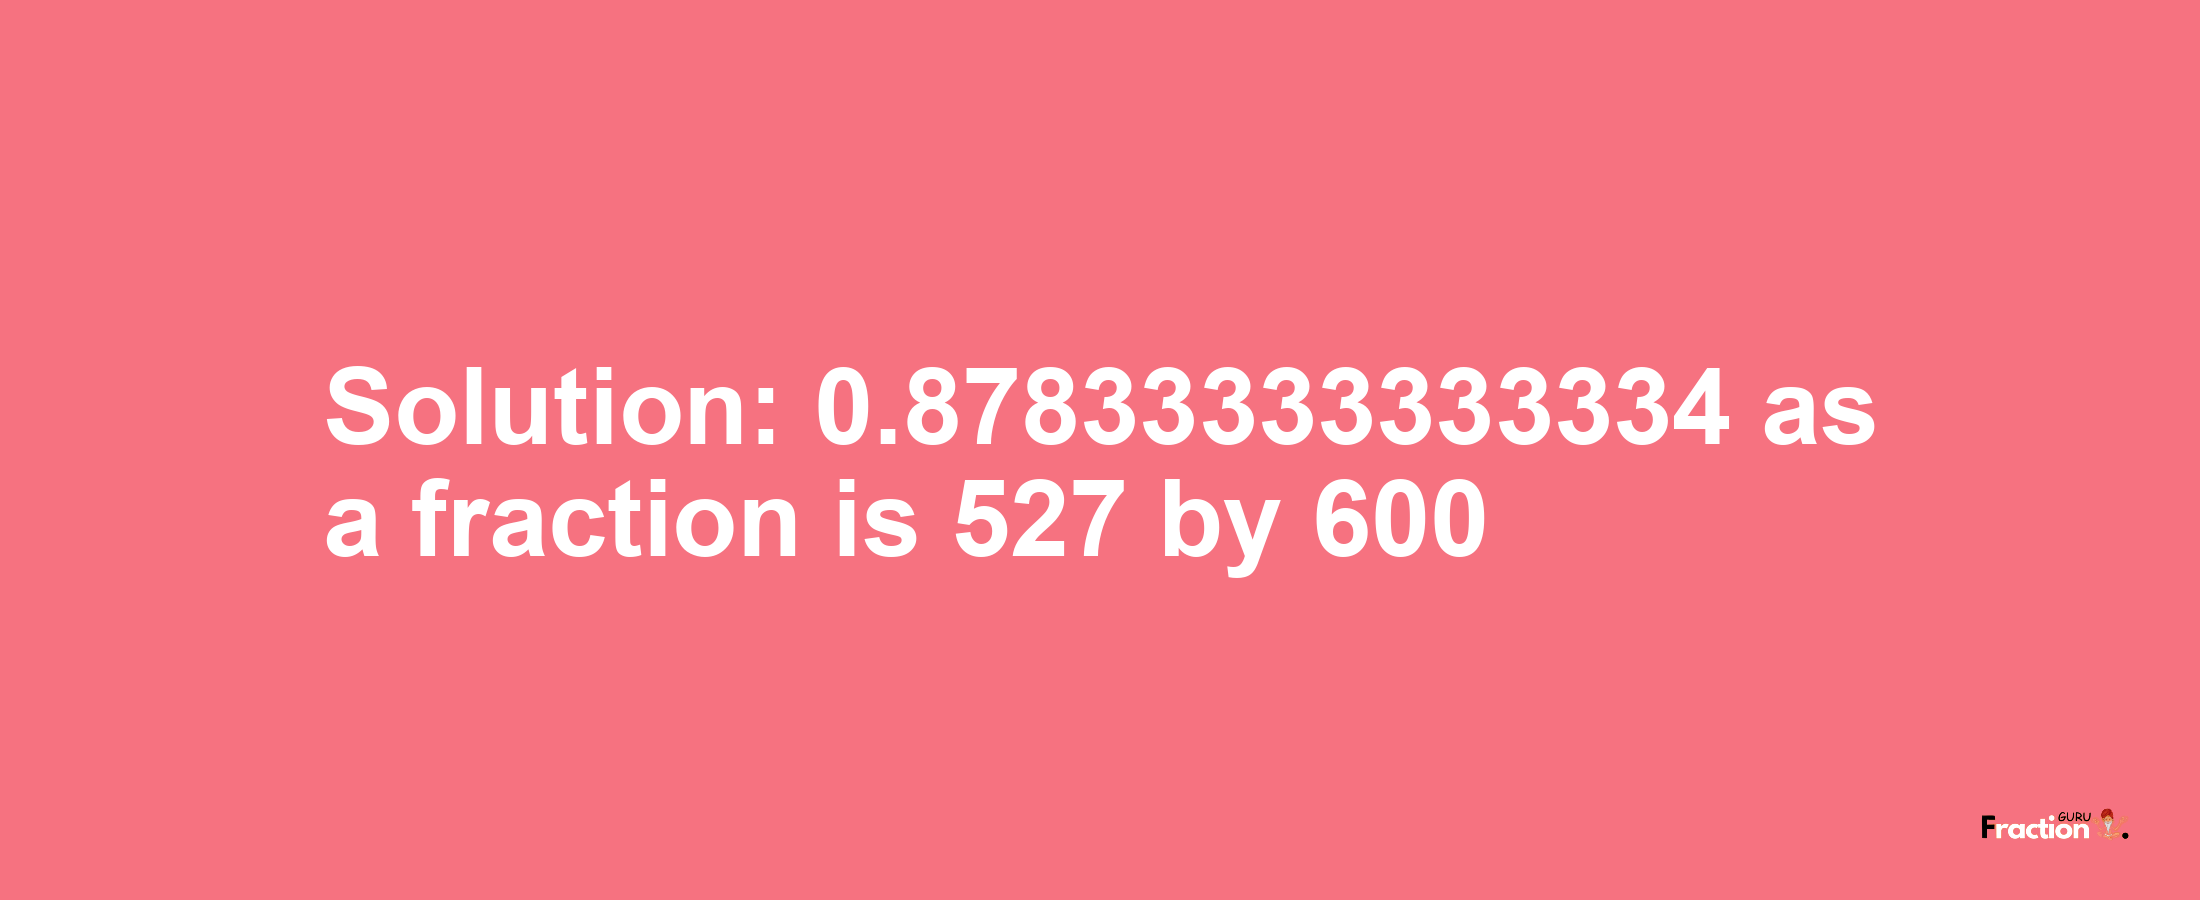 Solution:0.87833333333334 as a fraction is 527/600